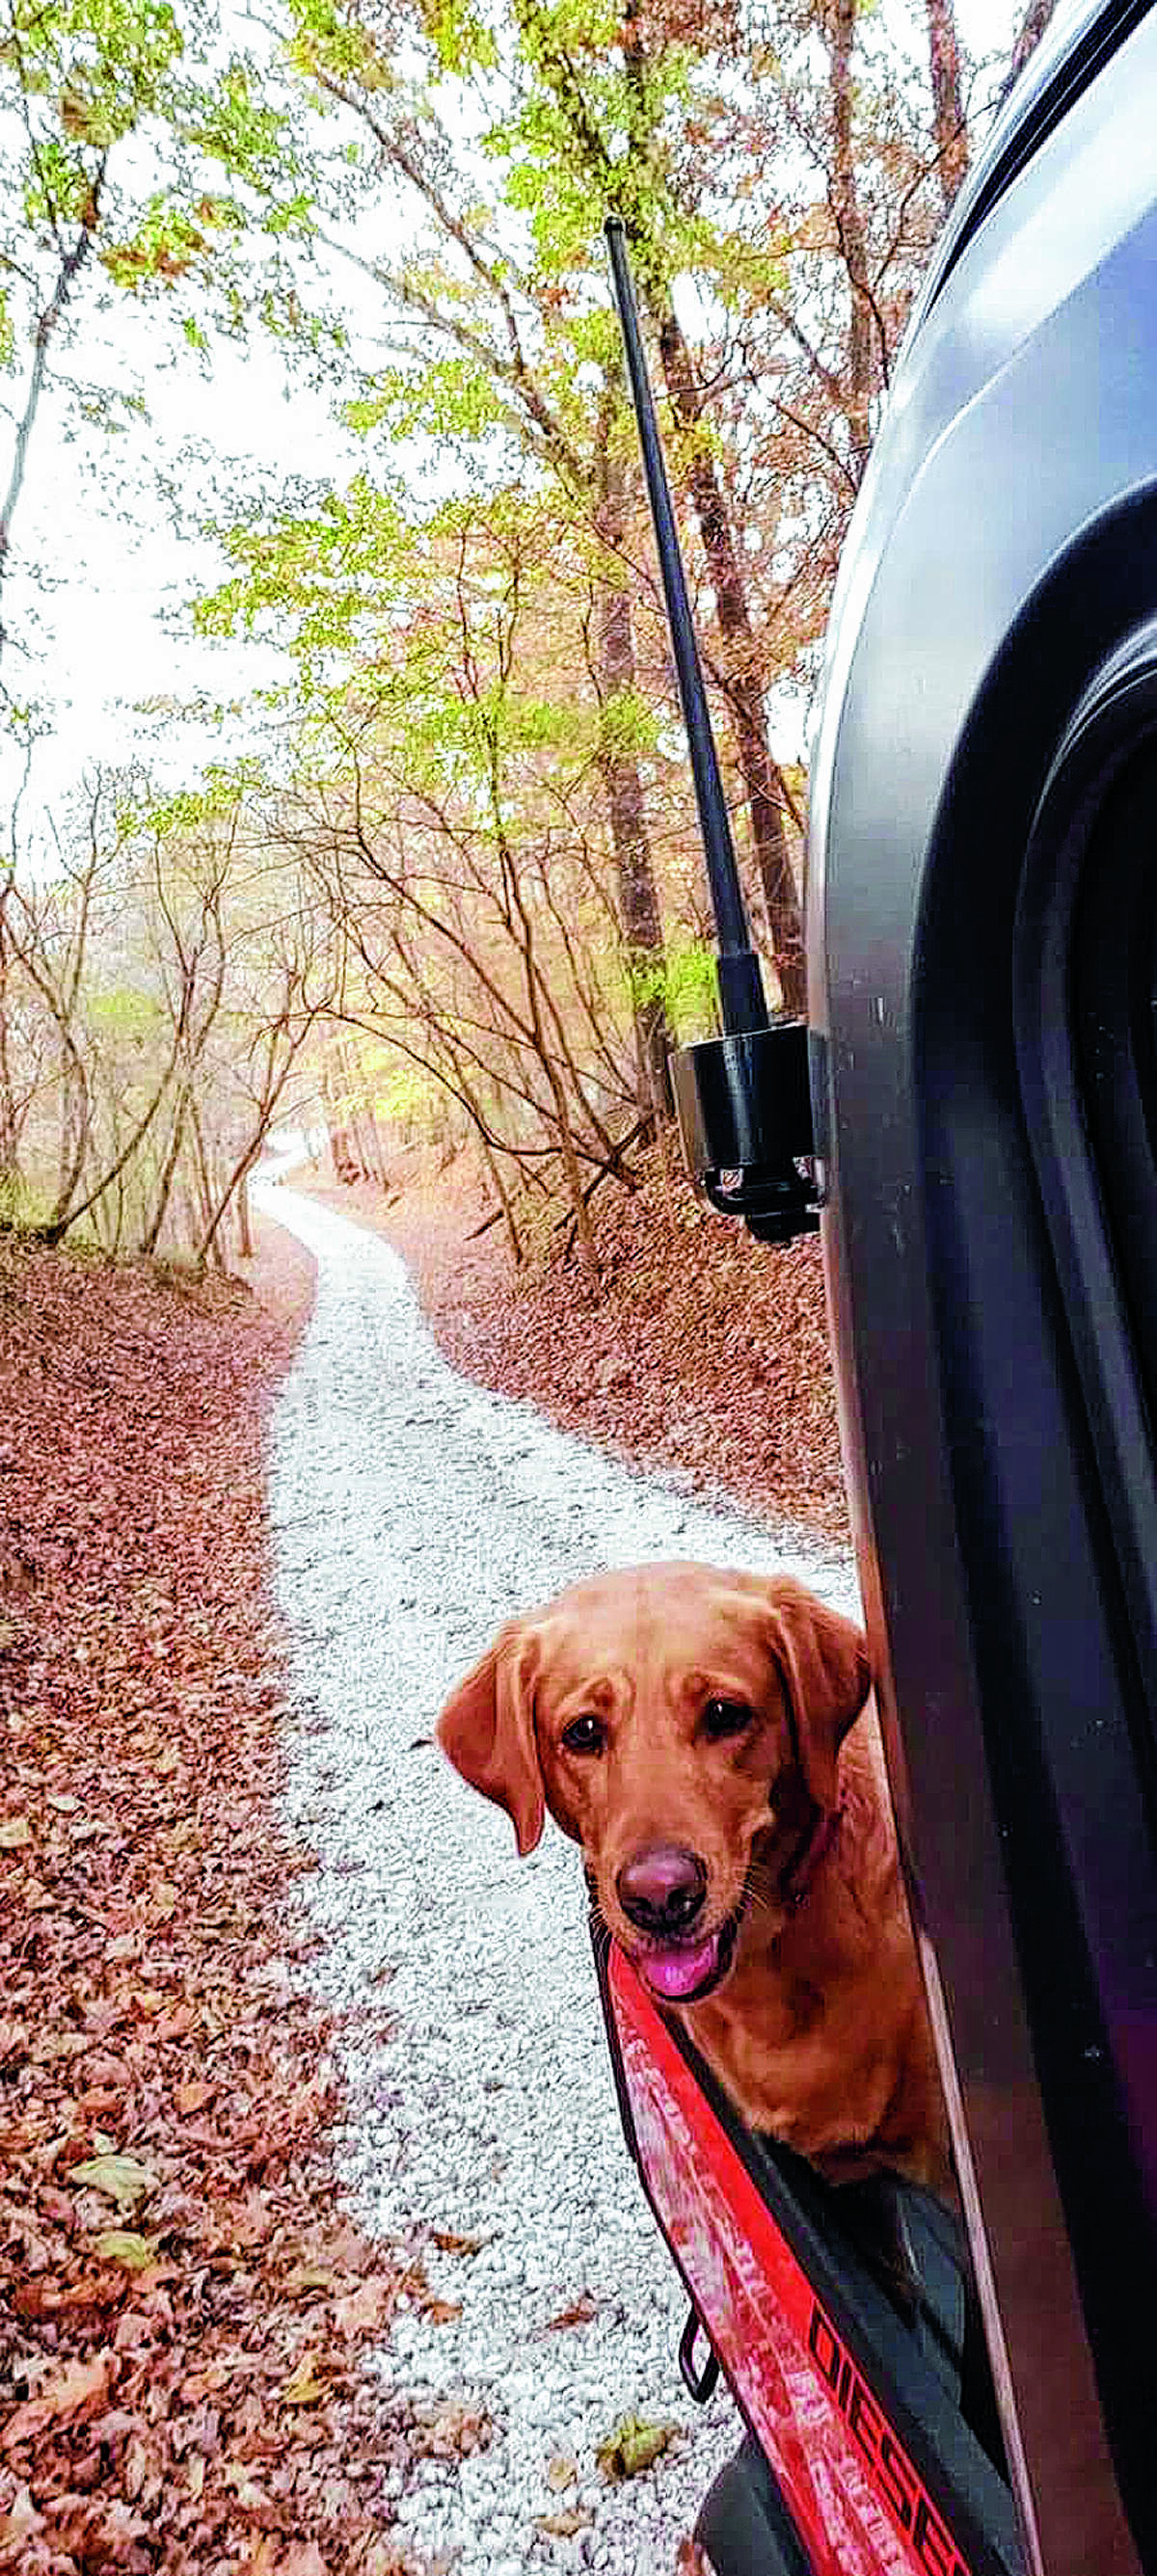 Ruby the Goldador enjoys watching the changing leaves during a ride through Brown County.